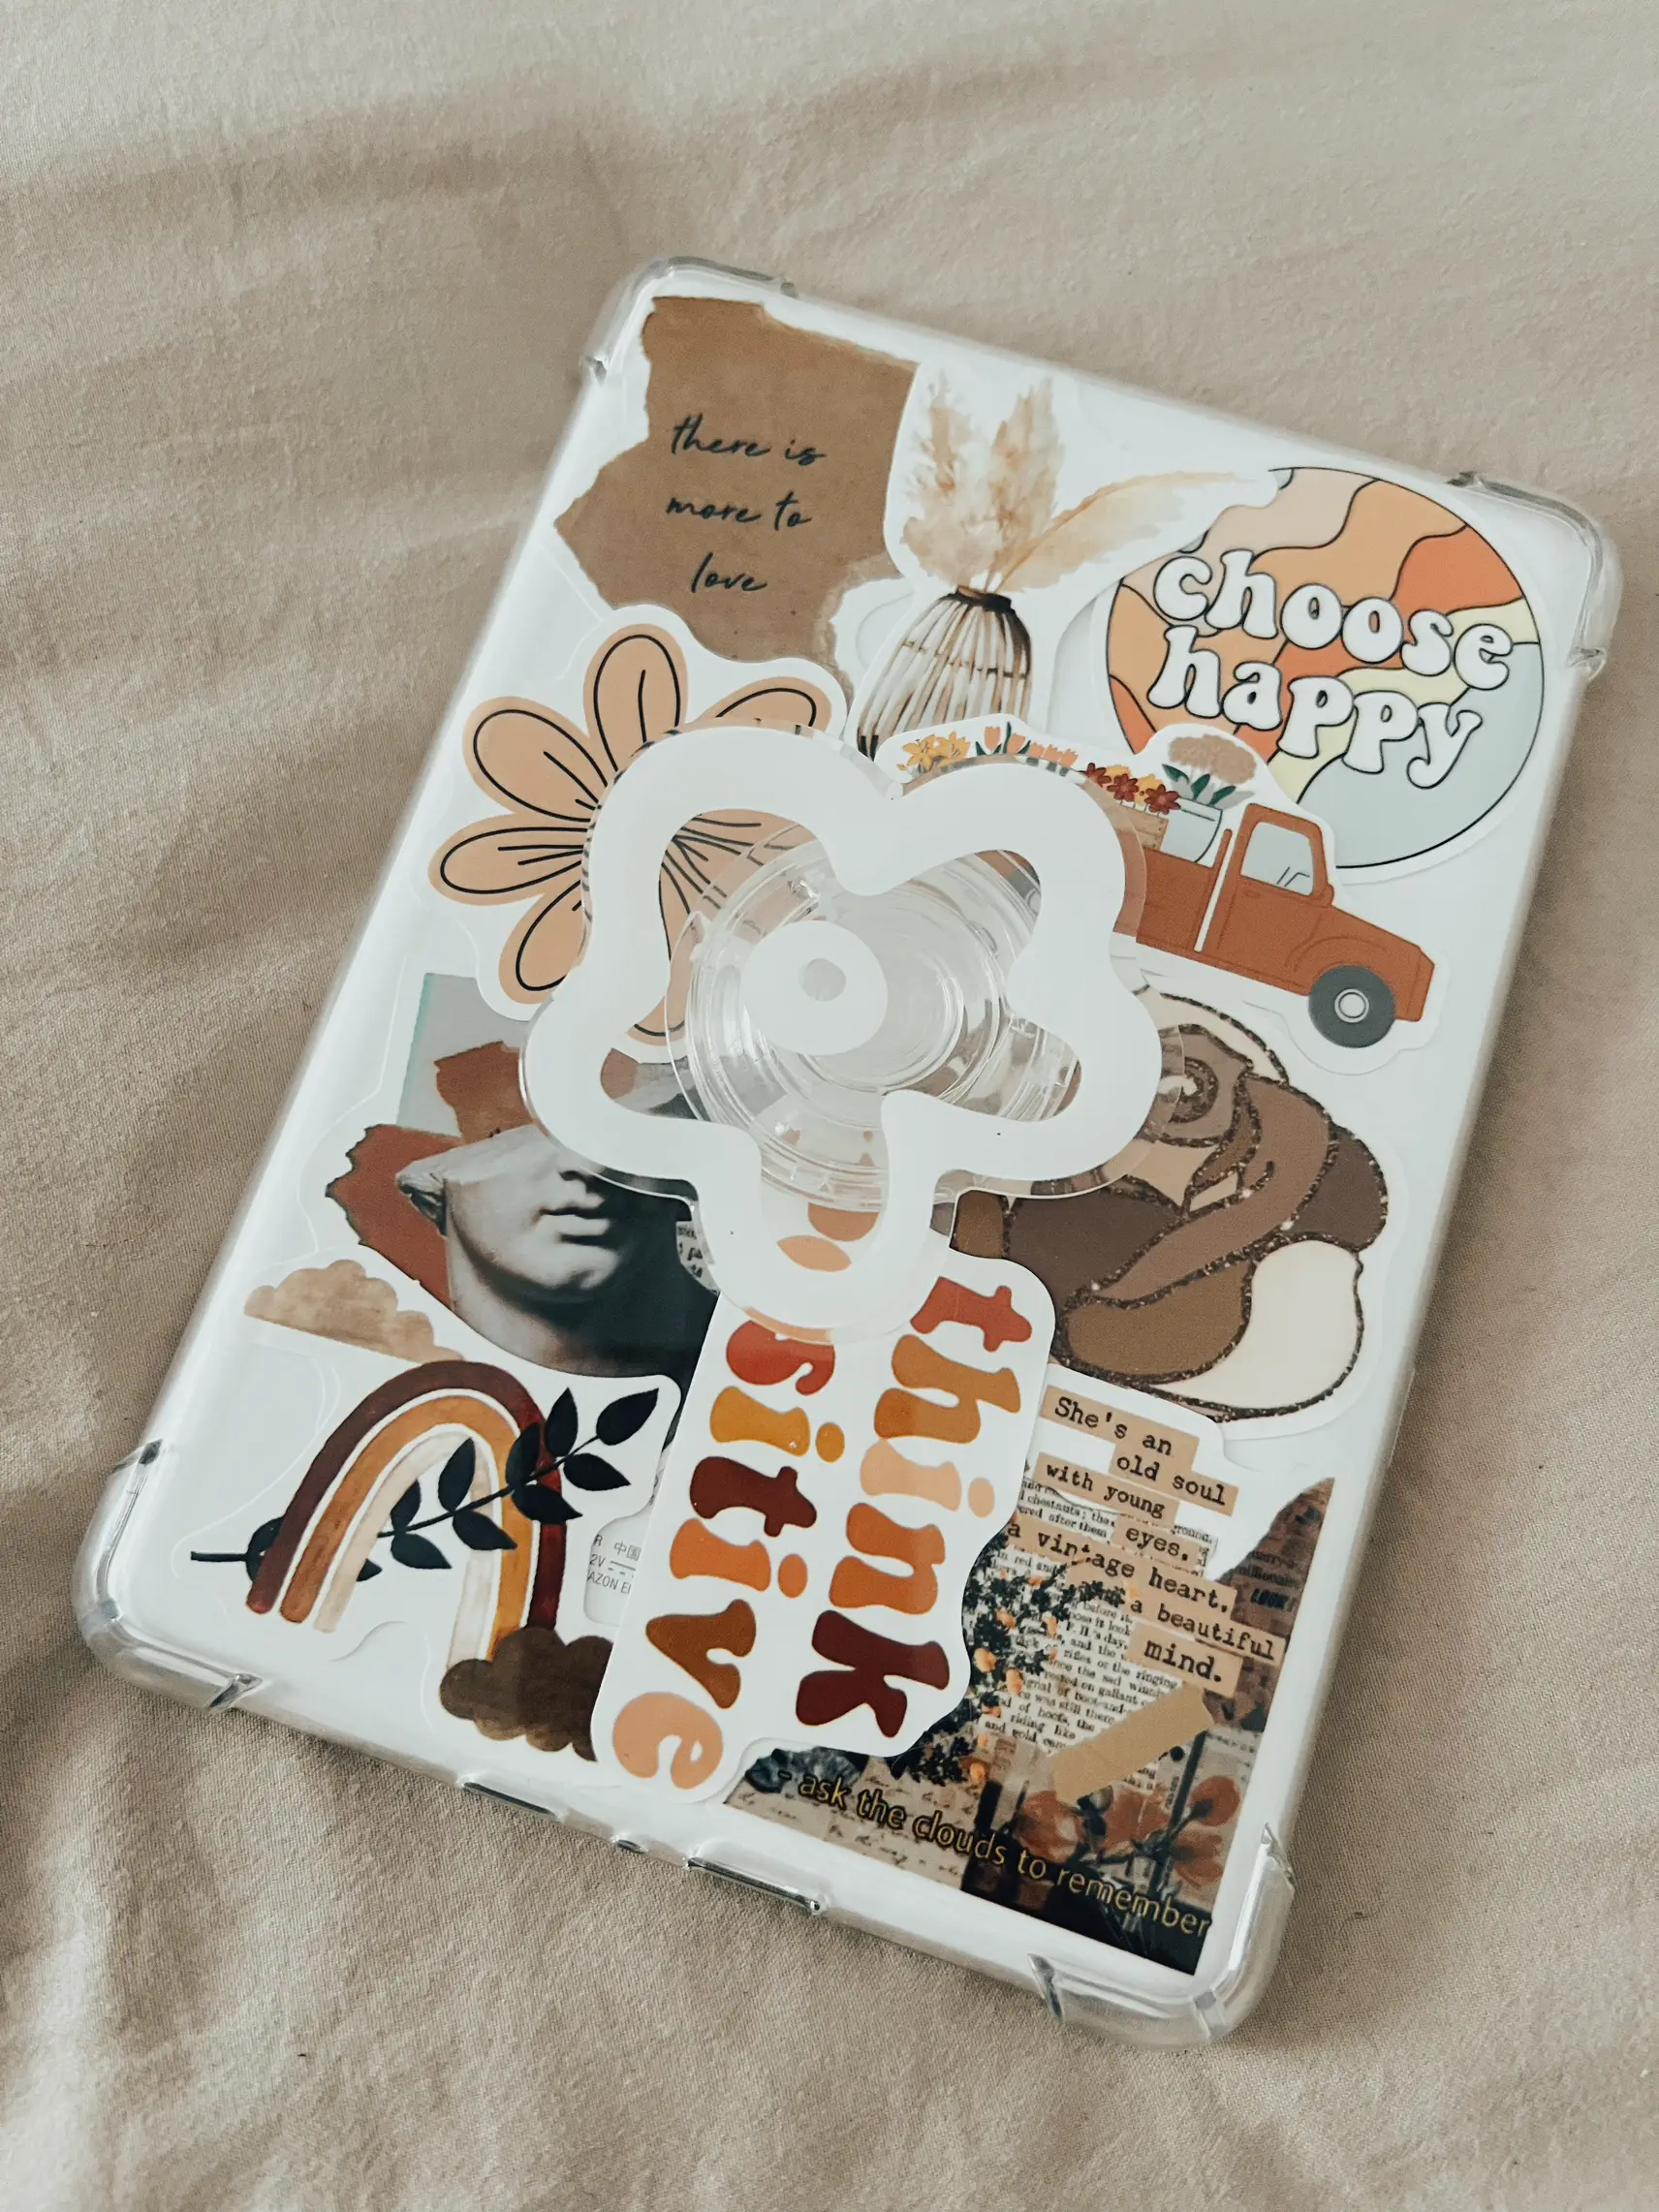 I decorated my clear kindle case! I love it! : r/kindle